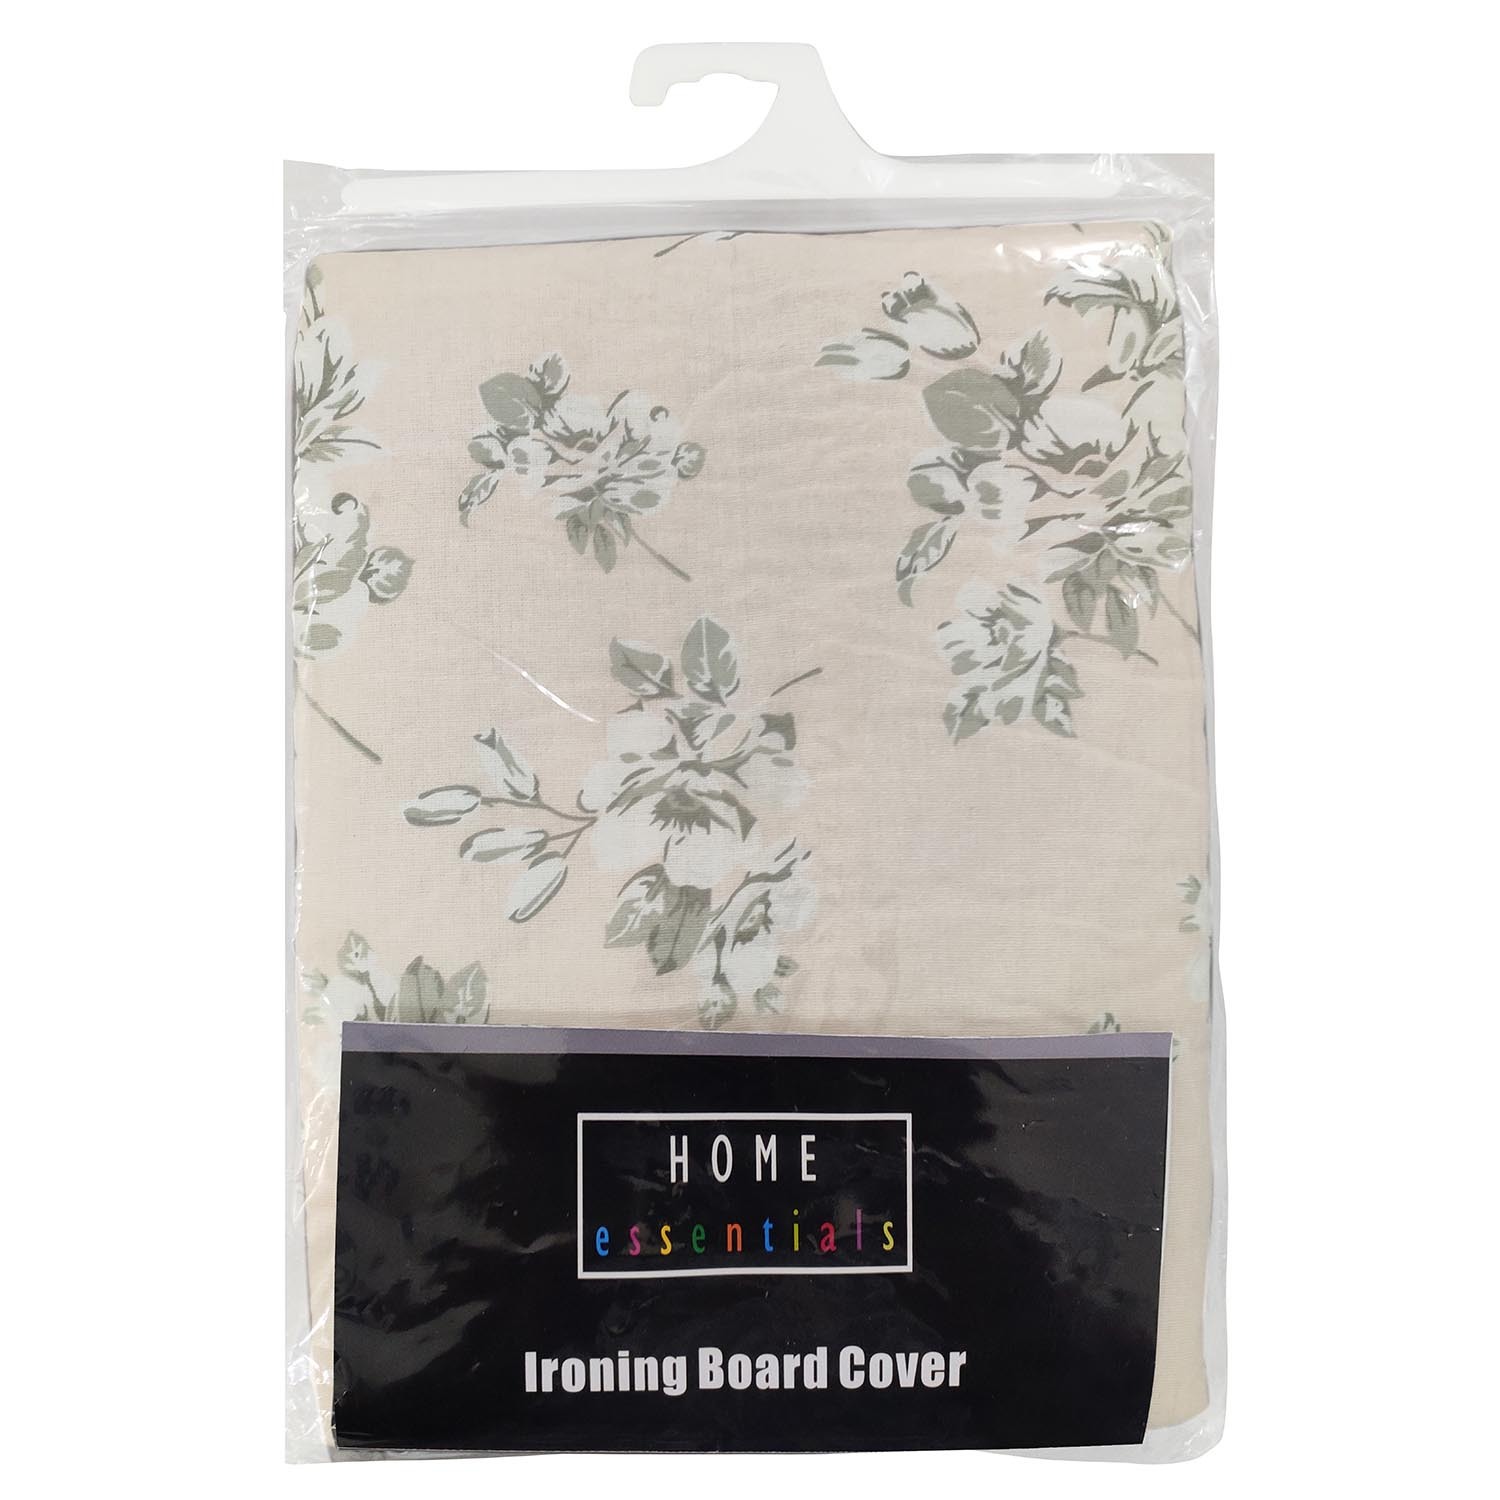 Ironing Board Cover - Small Image 2